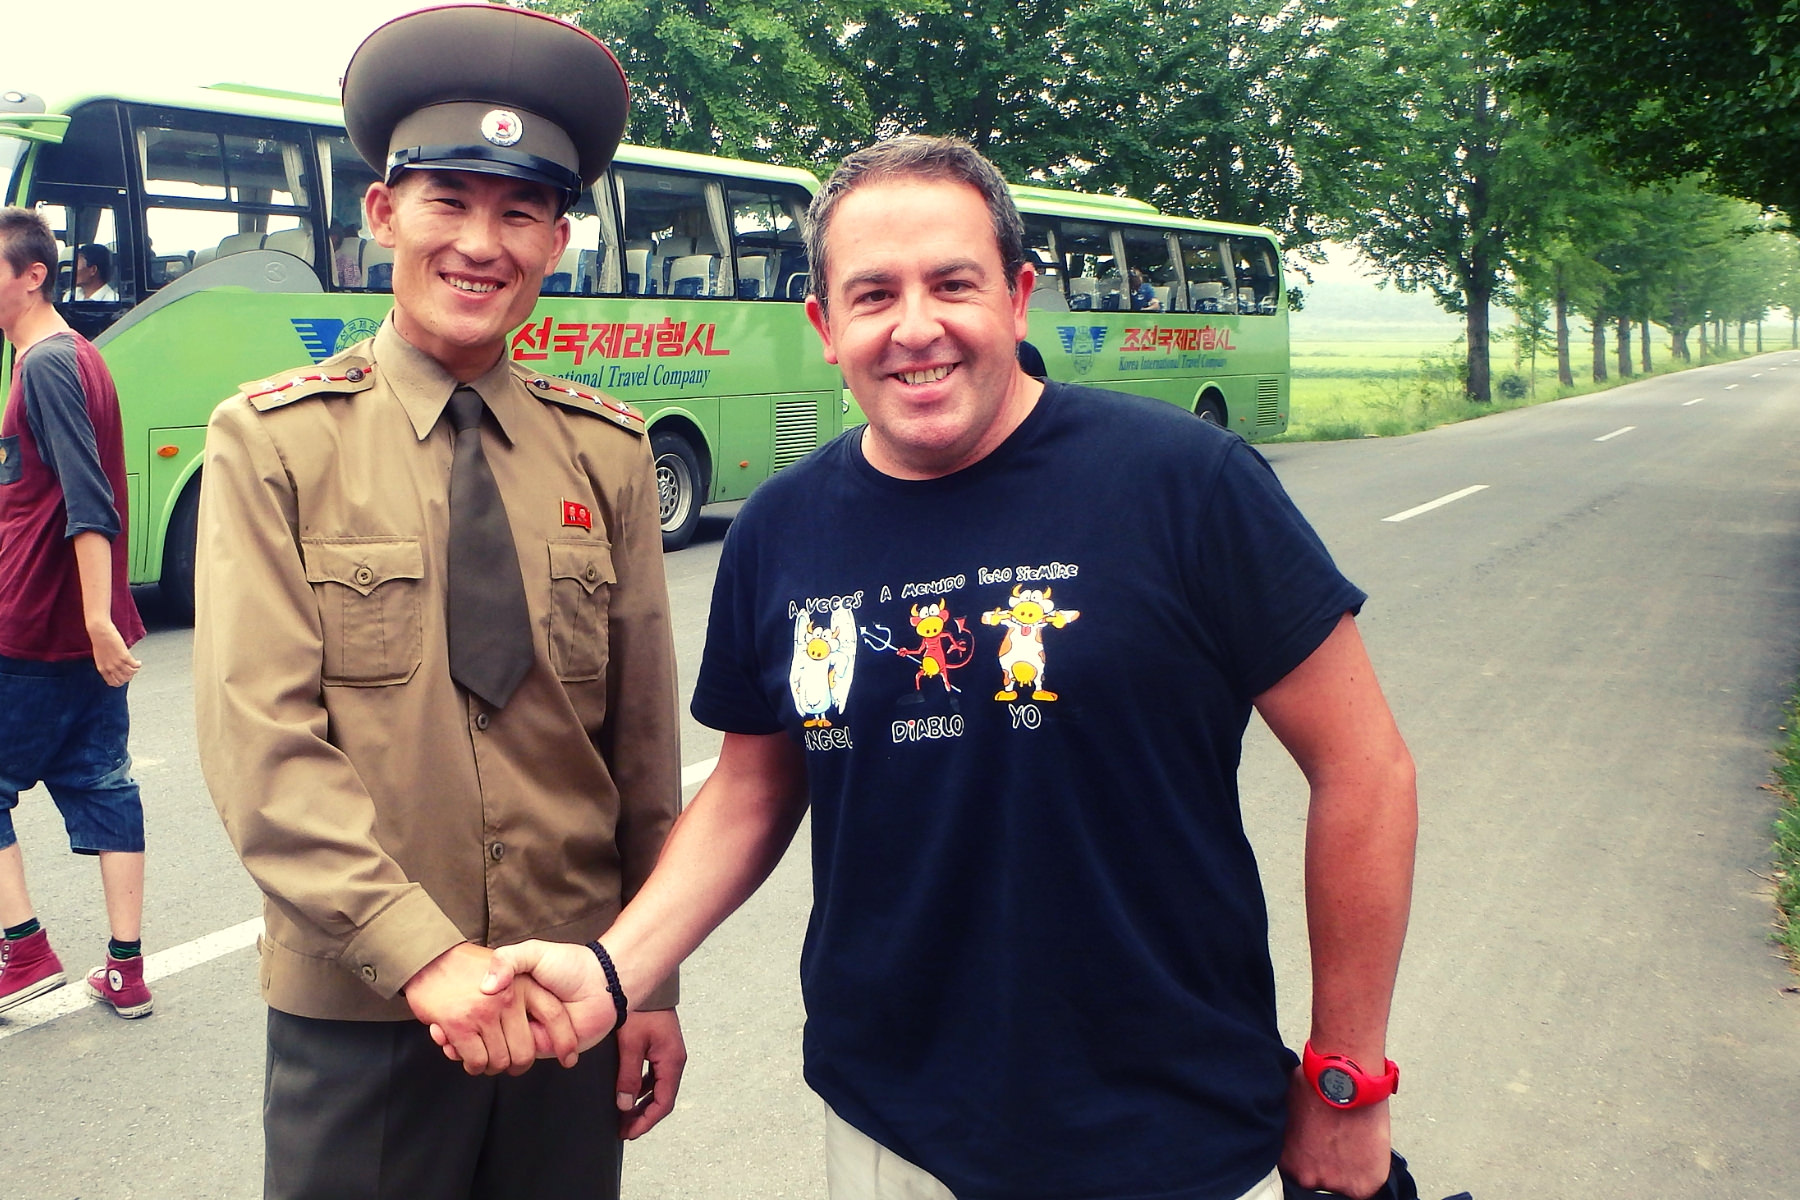 KTG traveller shakes hand with a North Korean soldier at the DMZ in North Korea. Panmunjom is the only place in the DPRK where we can take pictures of the North Korean military